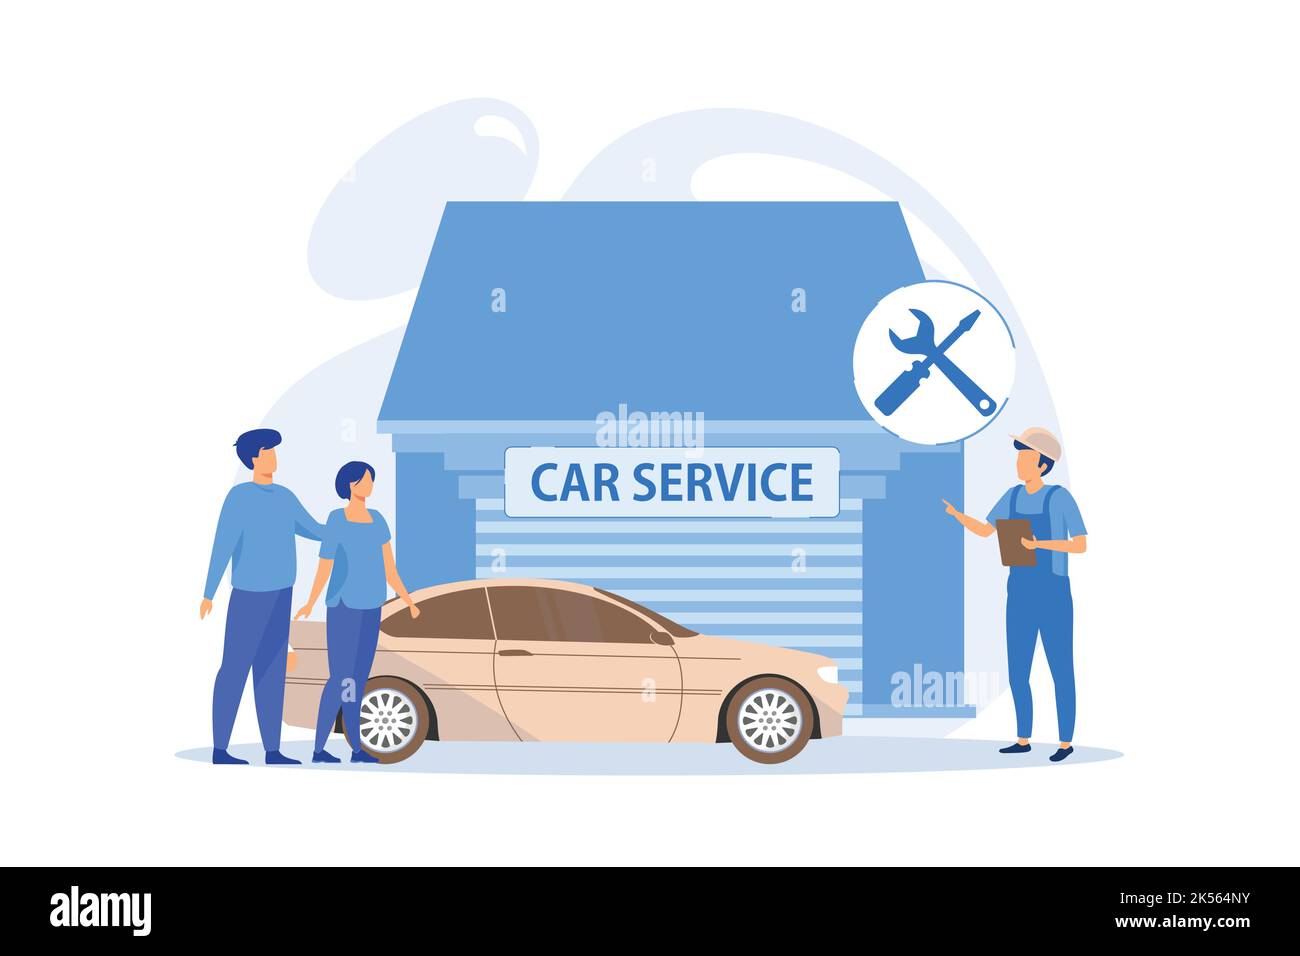 Auto mechanic and business people at car service having their car repaired. Car service, automobile repair shop, vehicle repair service concept. vecto Stock Vector